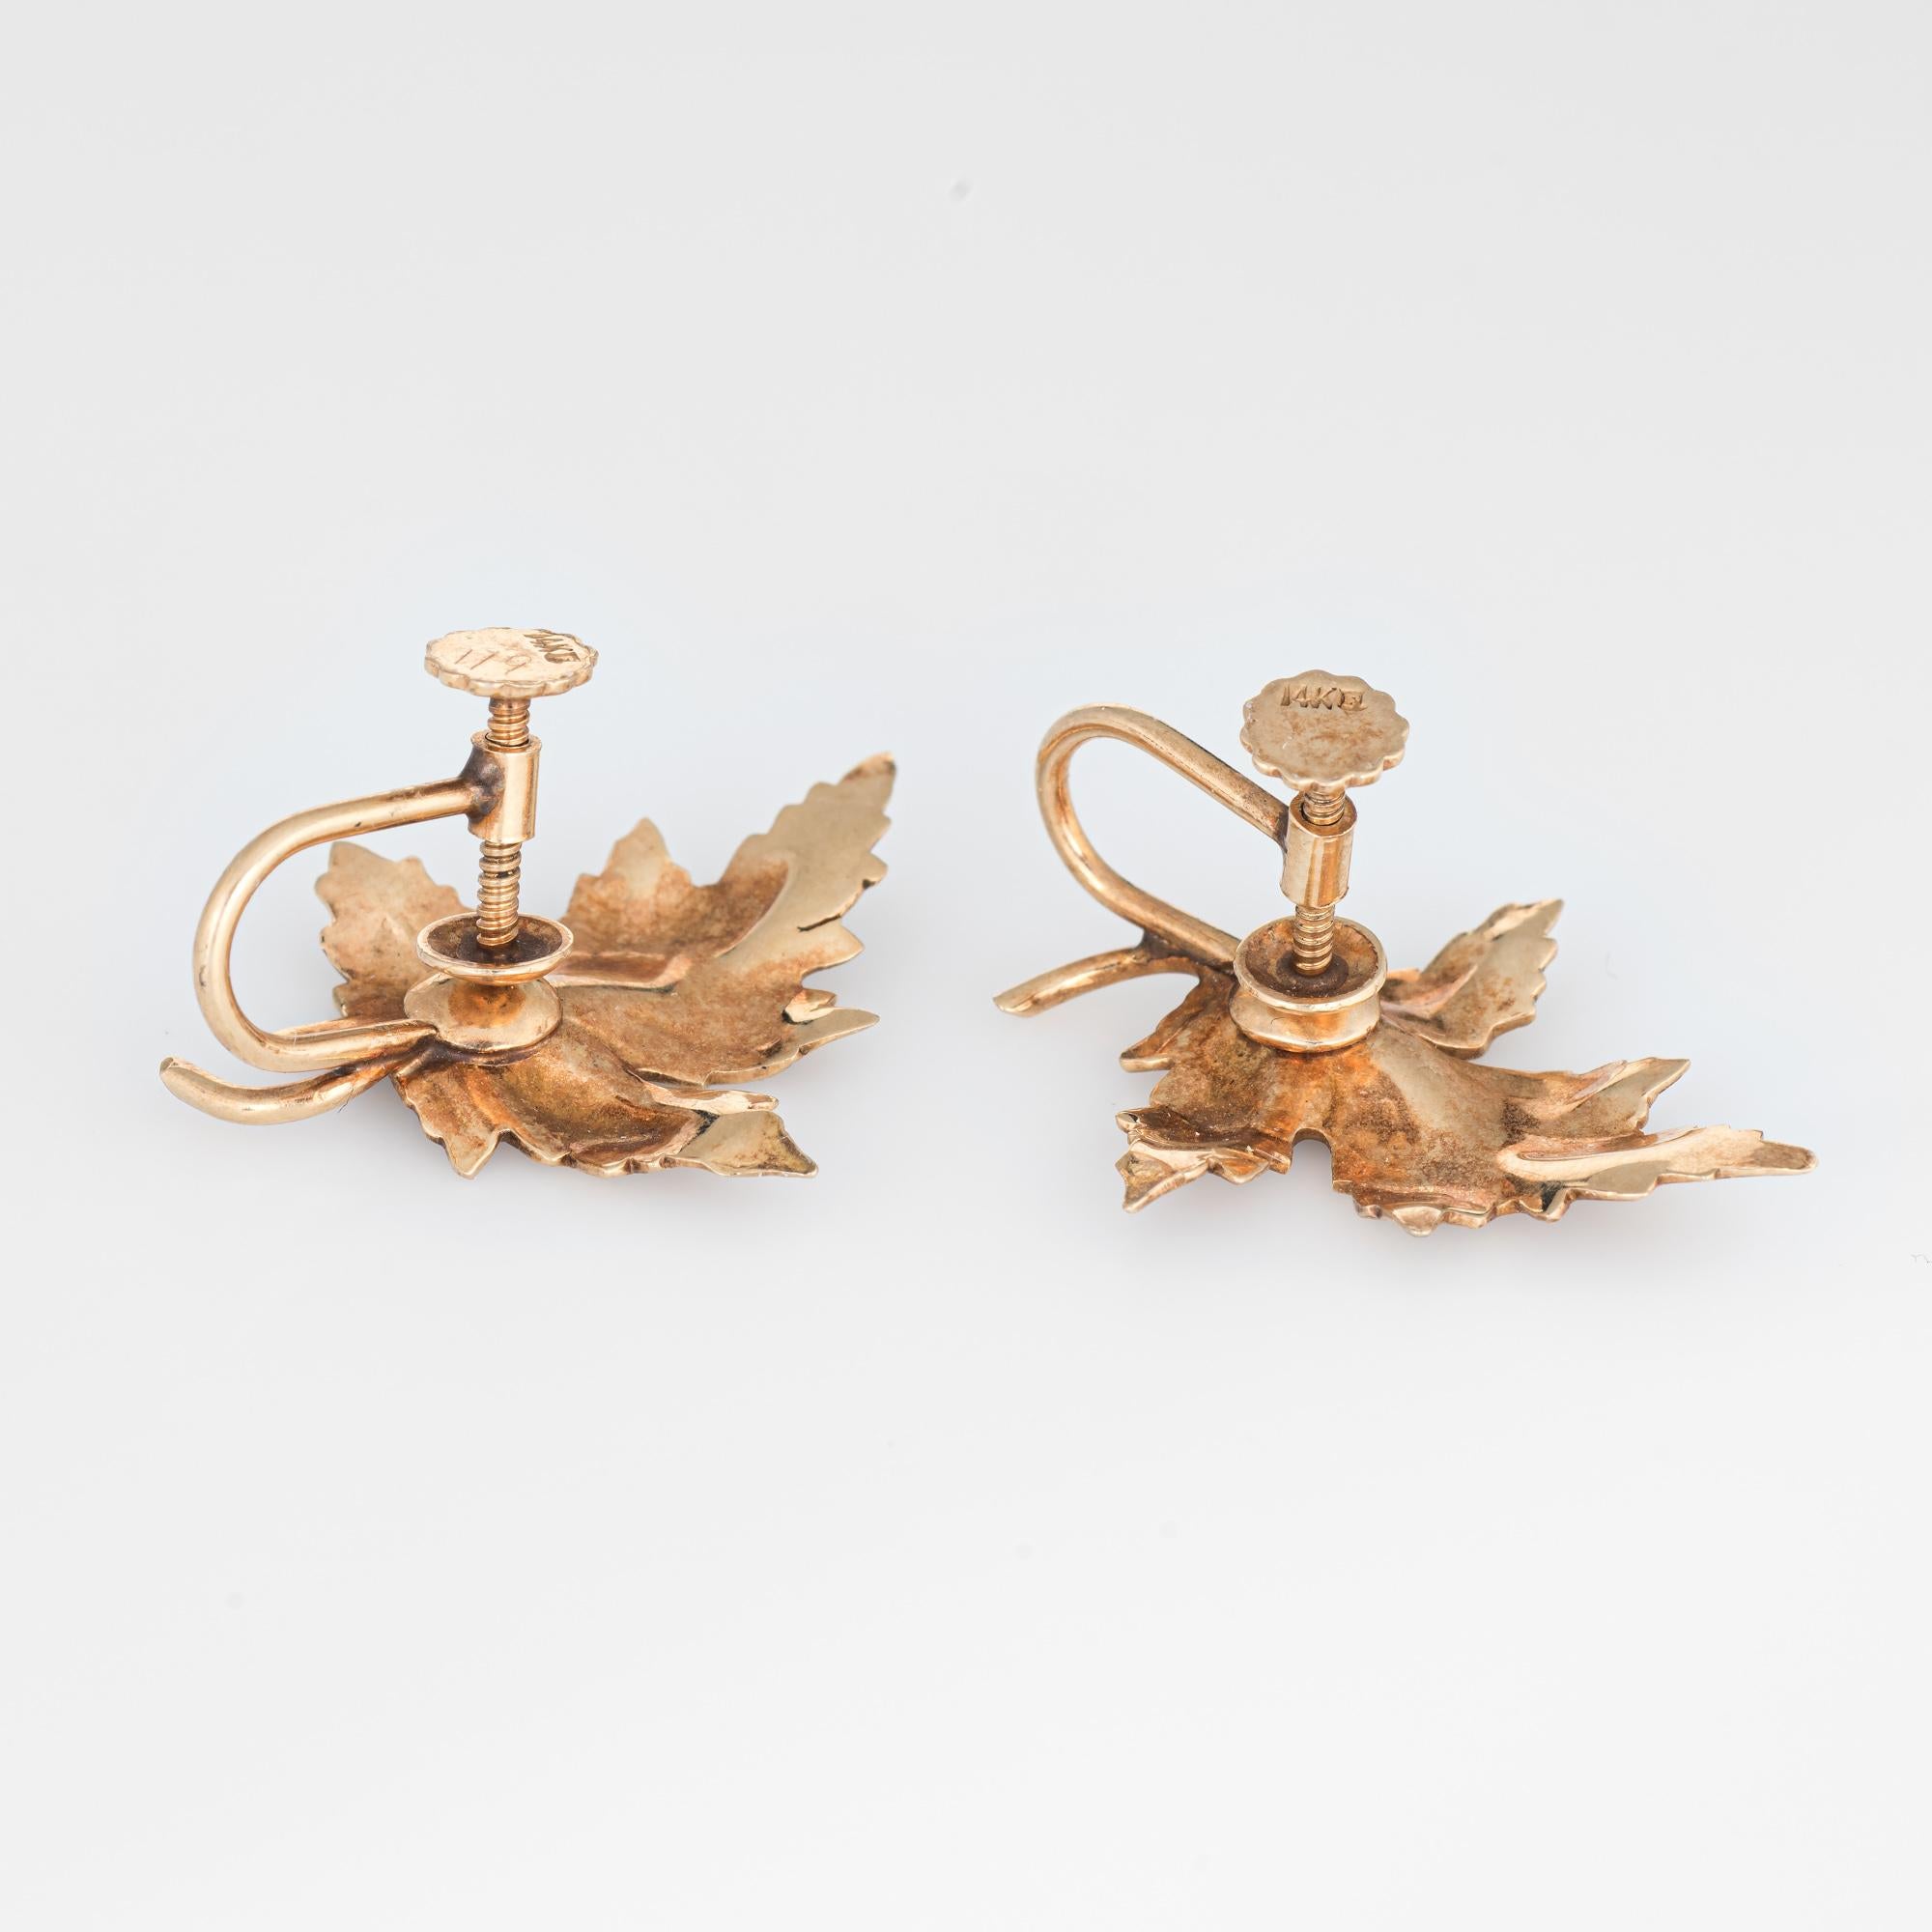 Stylish pair of vintage maple leaf earrings (circa 1950s to 1960s) crafted in 14k yellow gold. 

The charming maple leaf earrings are designed with lifelike details of veins to the leaves and a textured muted gold finish. Ideal for day or evening